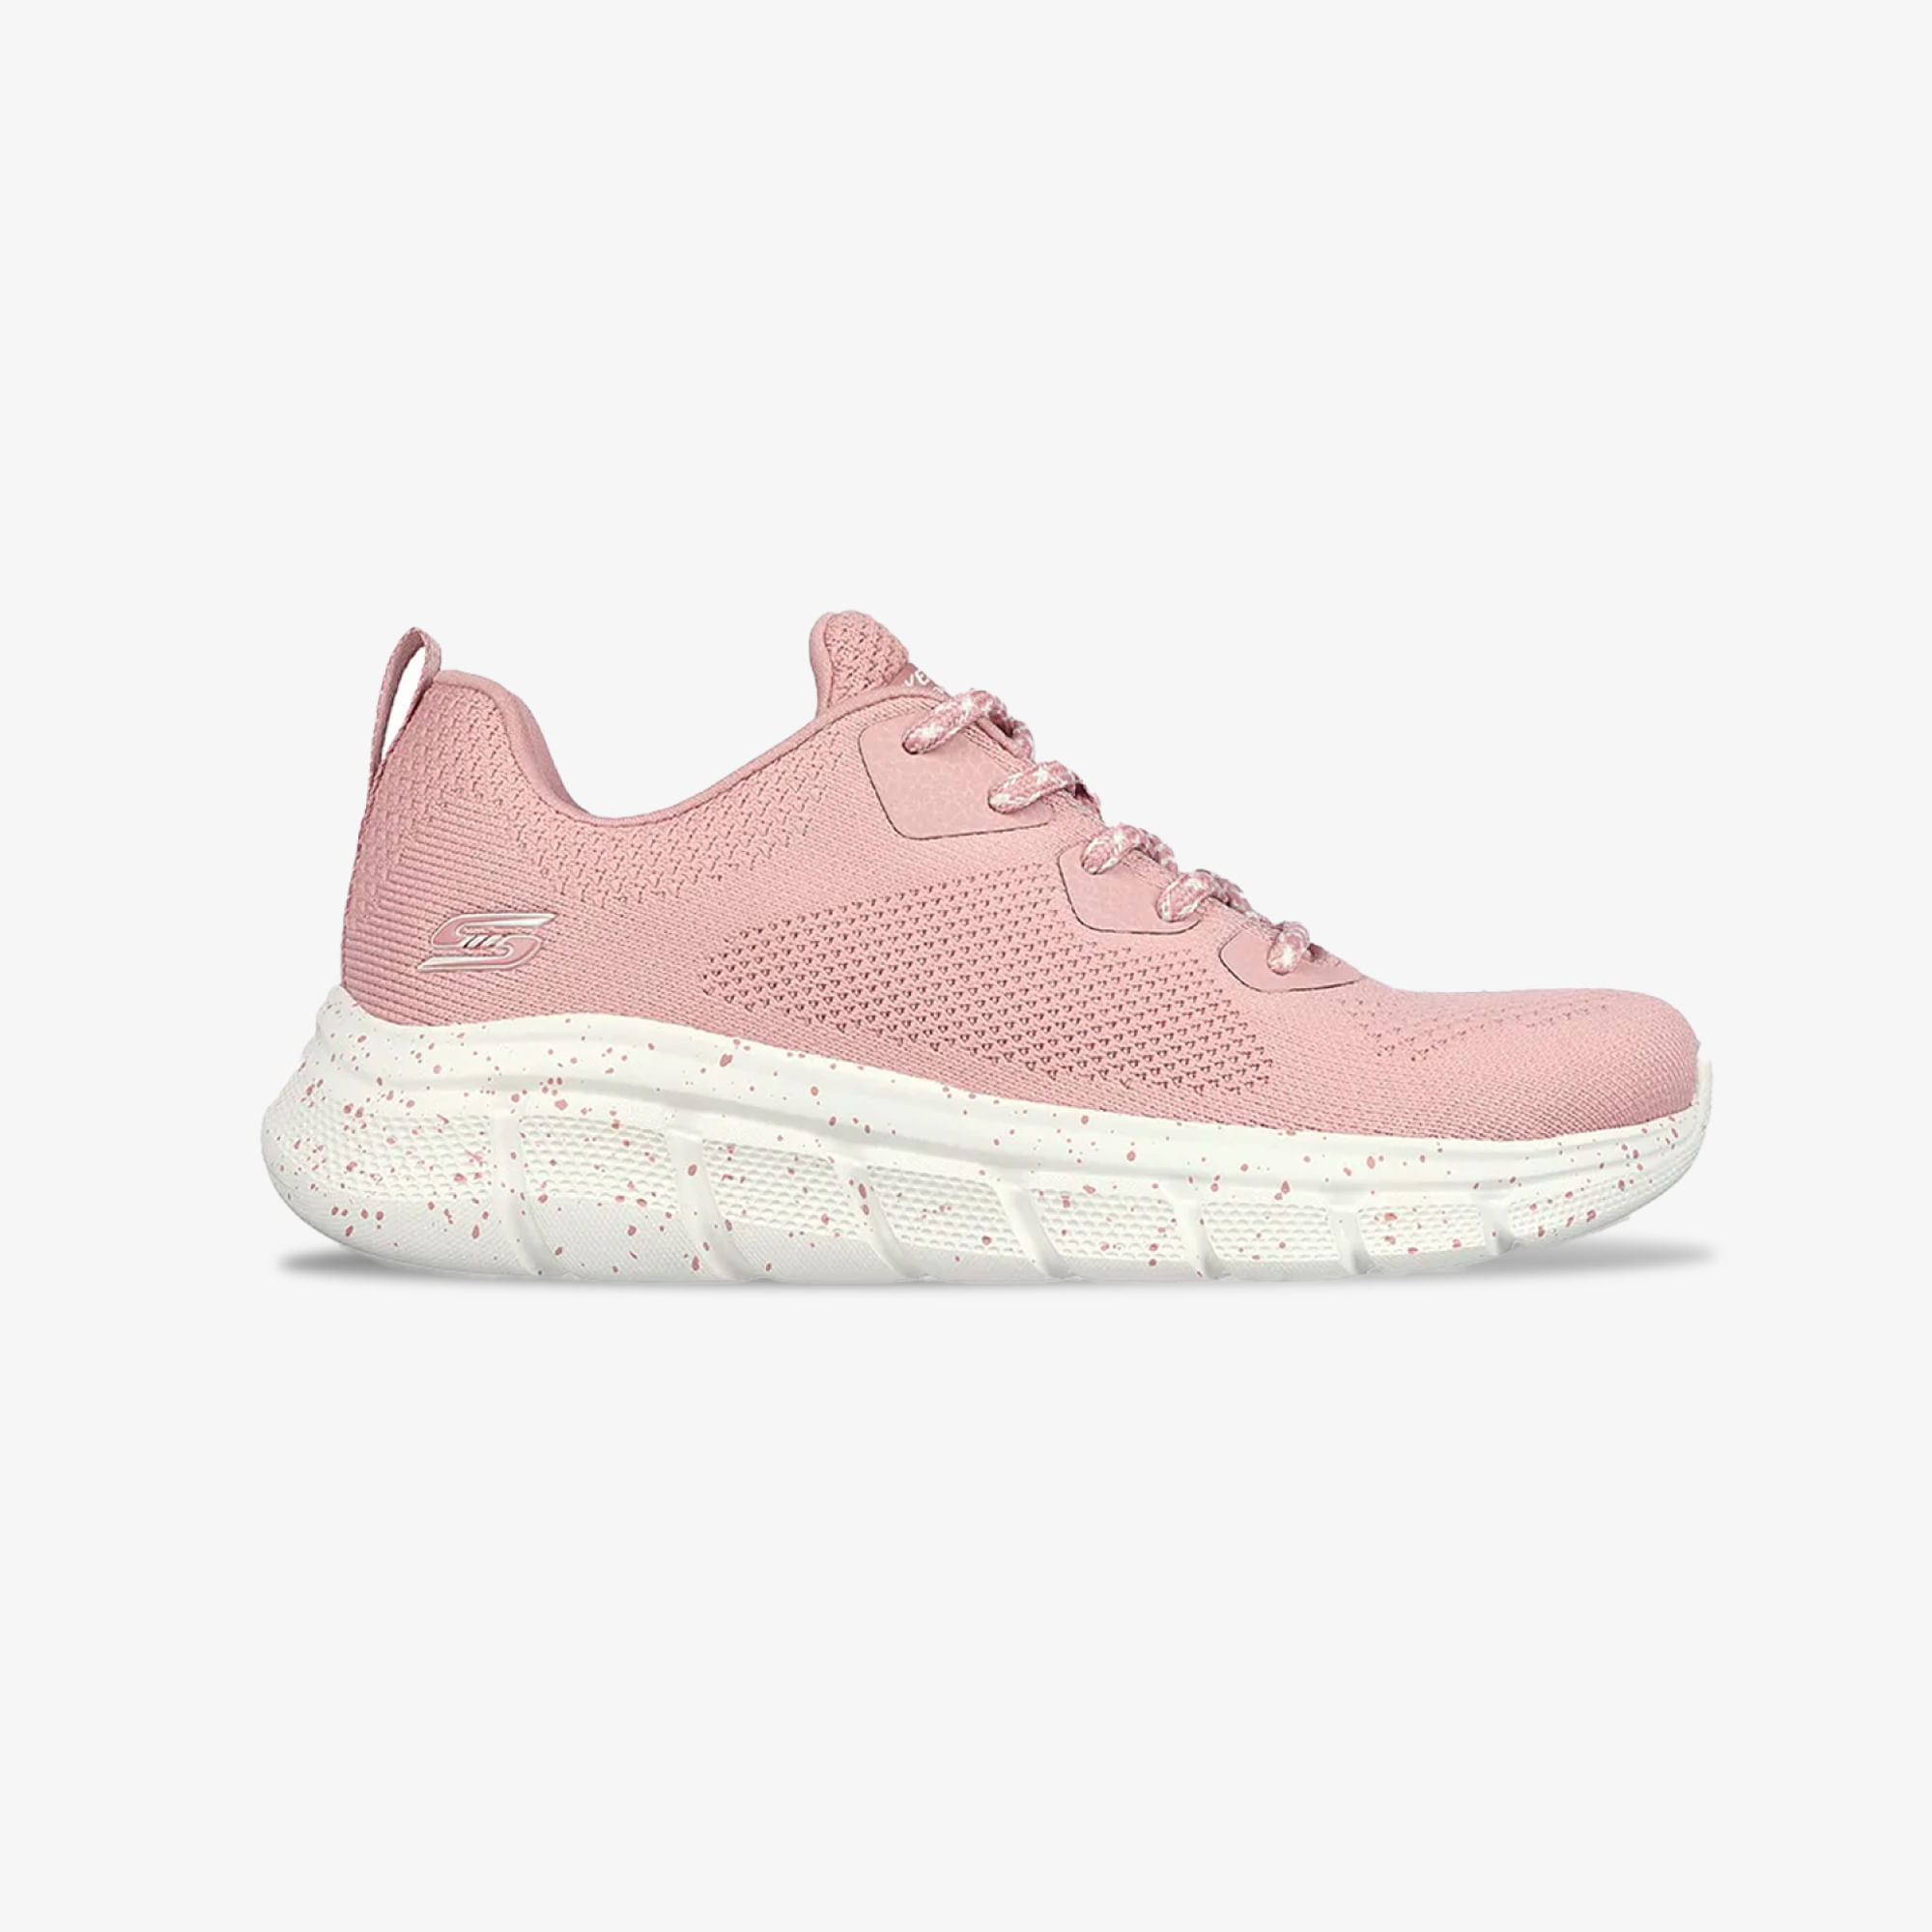 SKECHERS De mujer BOBS Squad Chaos - Cross Bandz - COLOMBIA